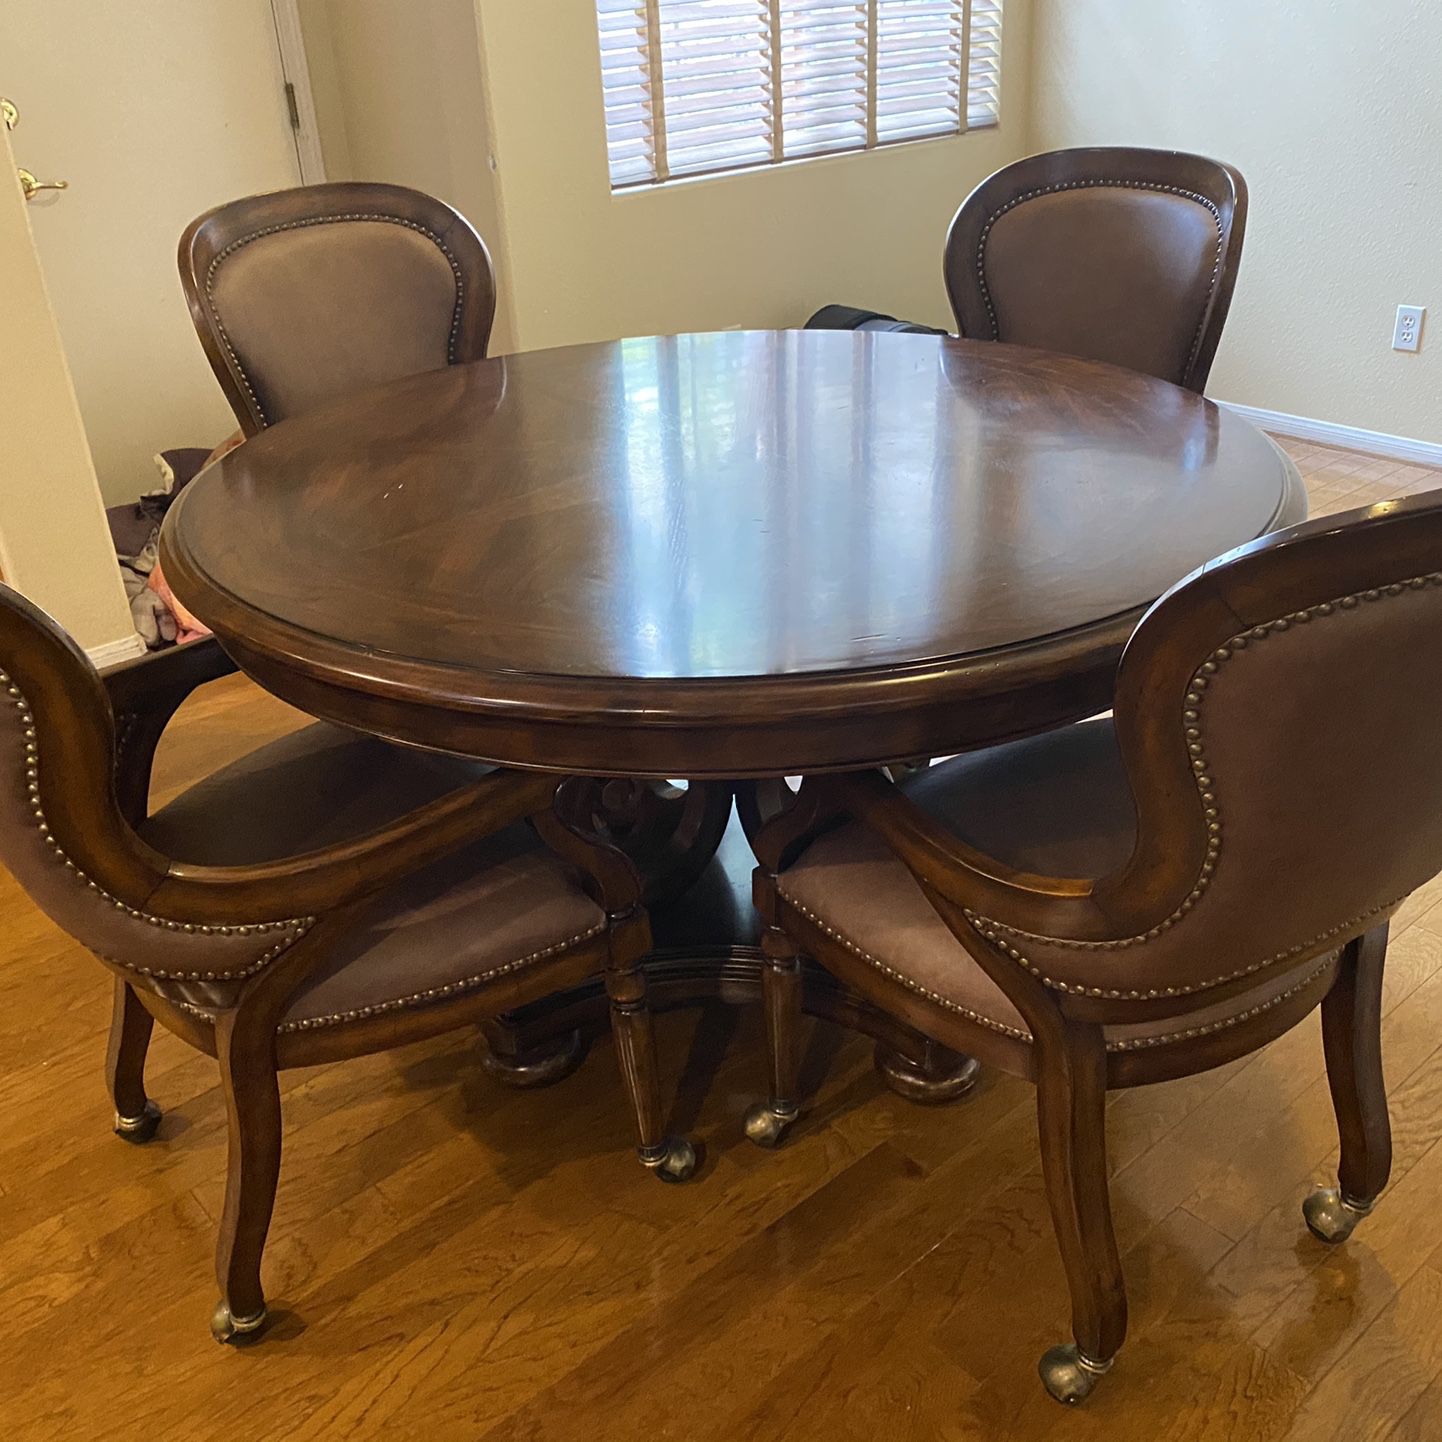 Designer Dining Table Solid Wood (oak And Walnut) Solid Wood Chairs With Real Leather 